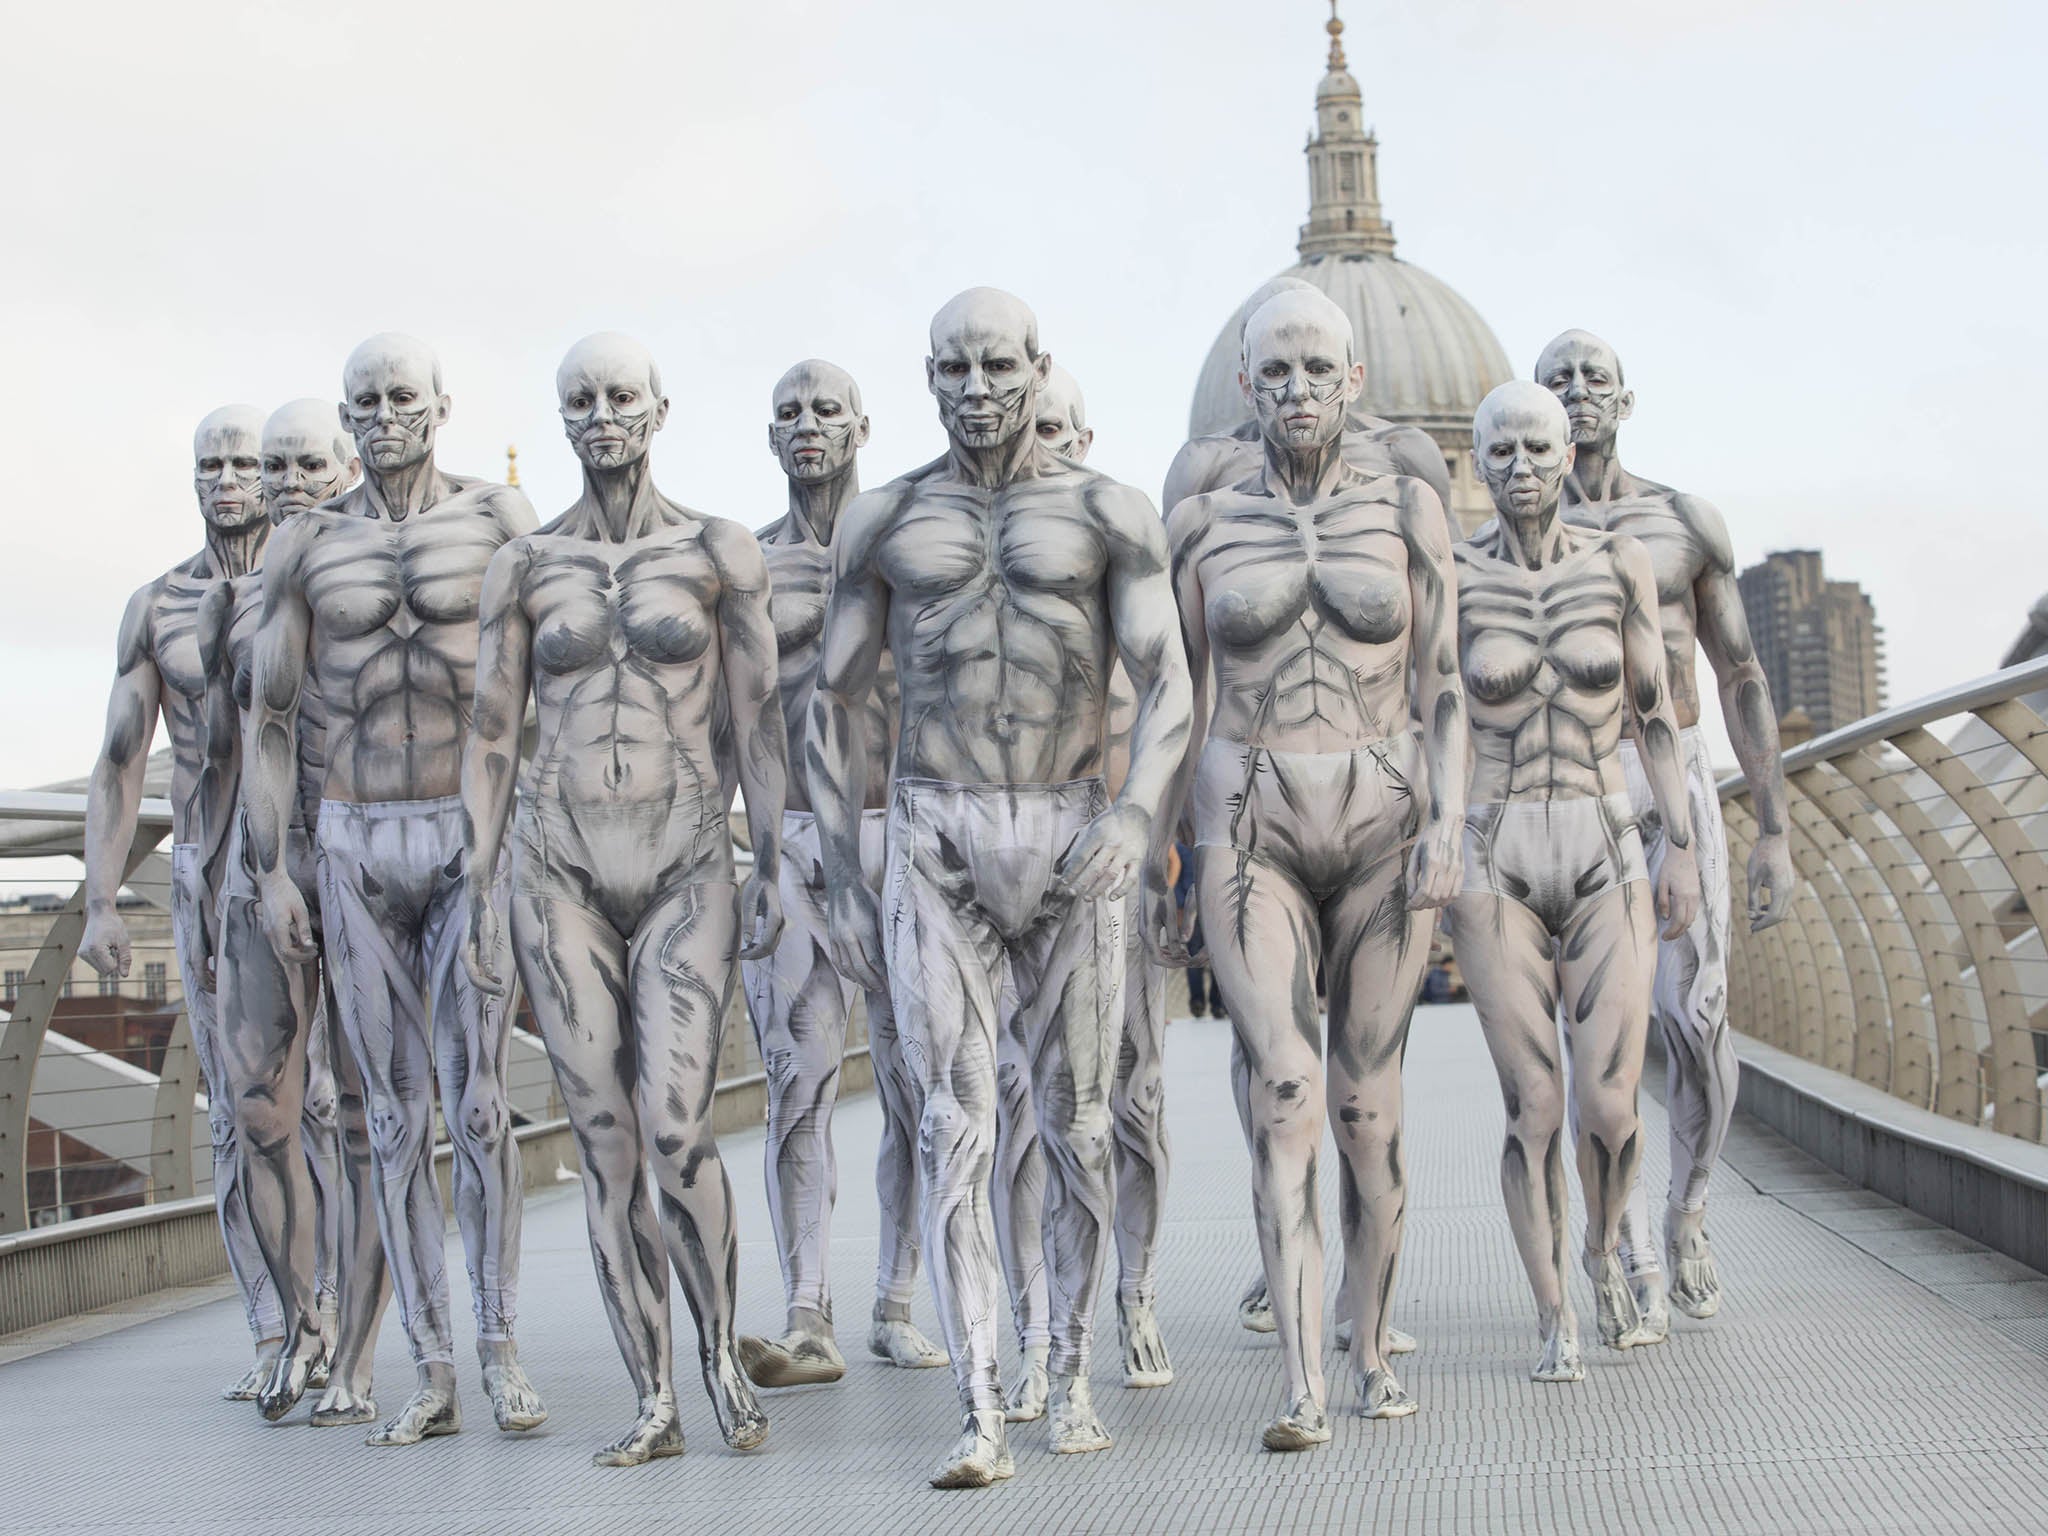 Twenty models, who have been turned into ‘humanoid’ robots by body artists to promote the new 'Westworld' TV series